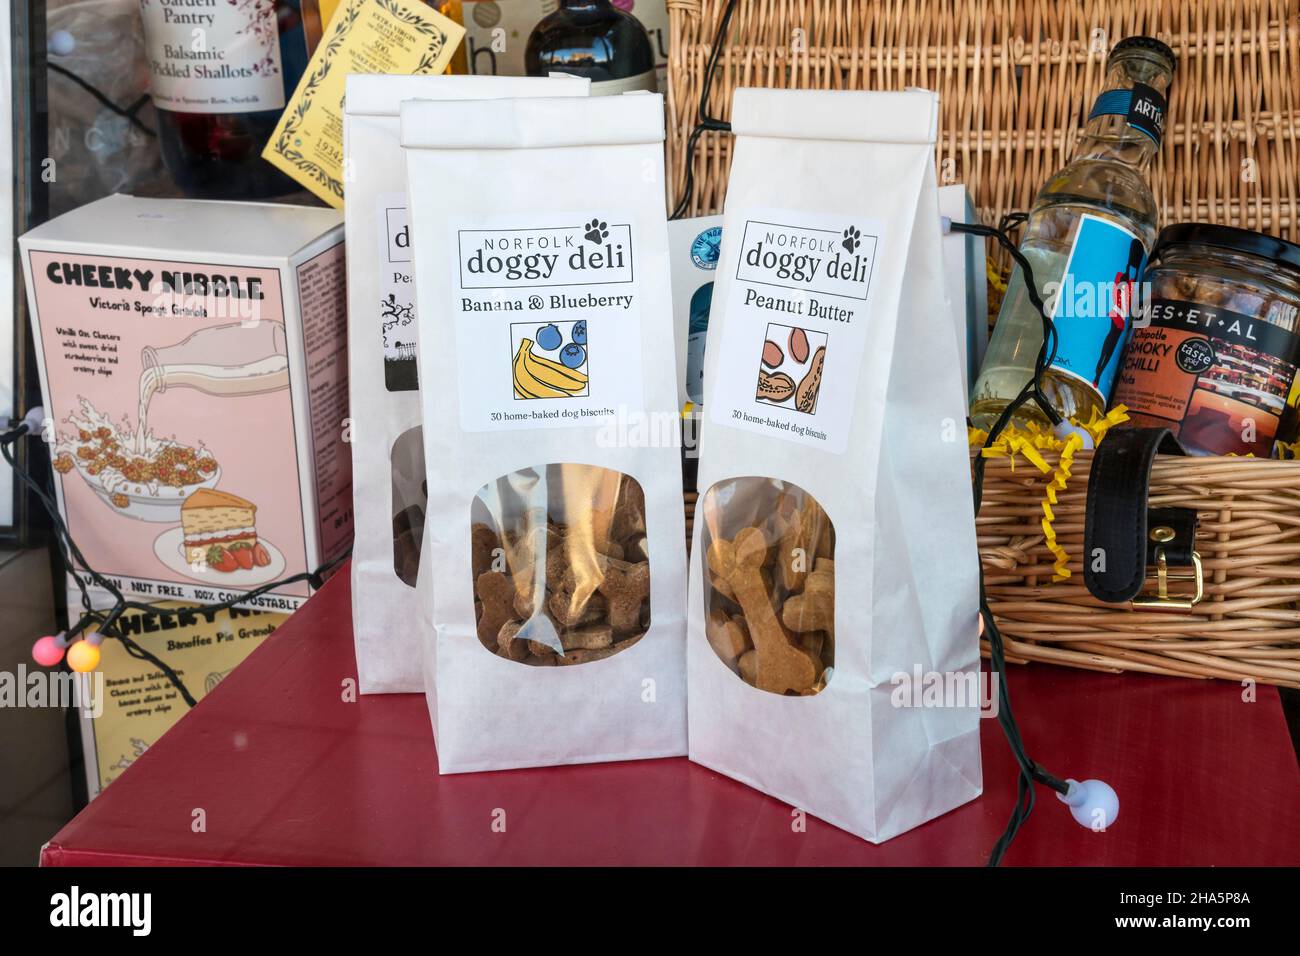 Norfolk doggy deli home-baked, flavoured dog biscuits. Stock Photo